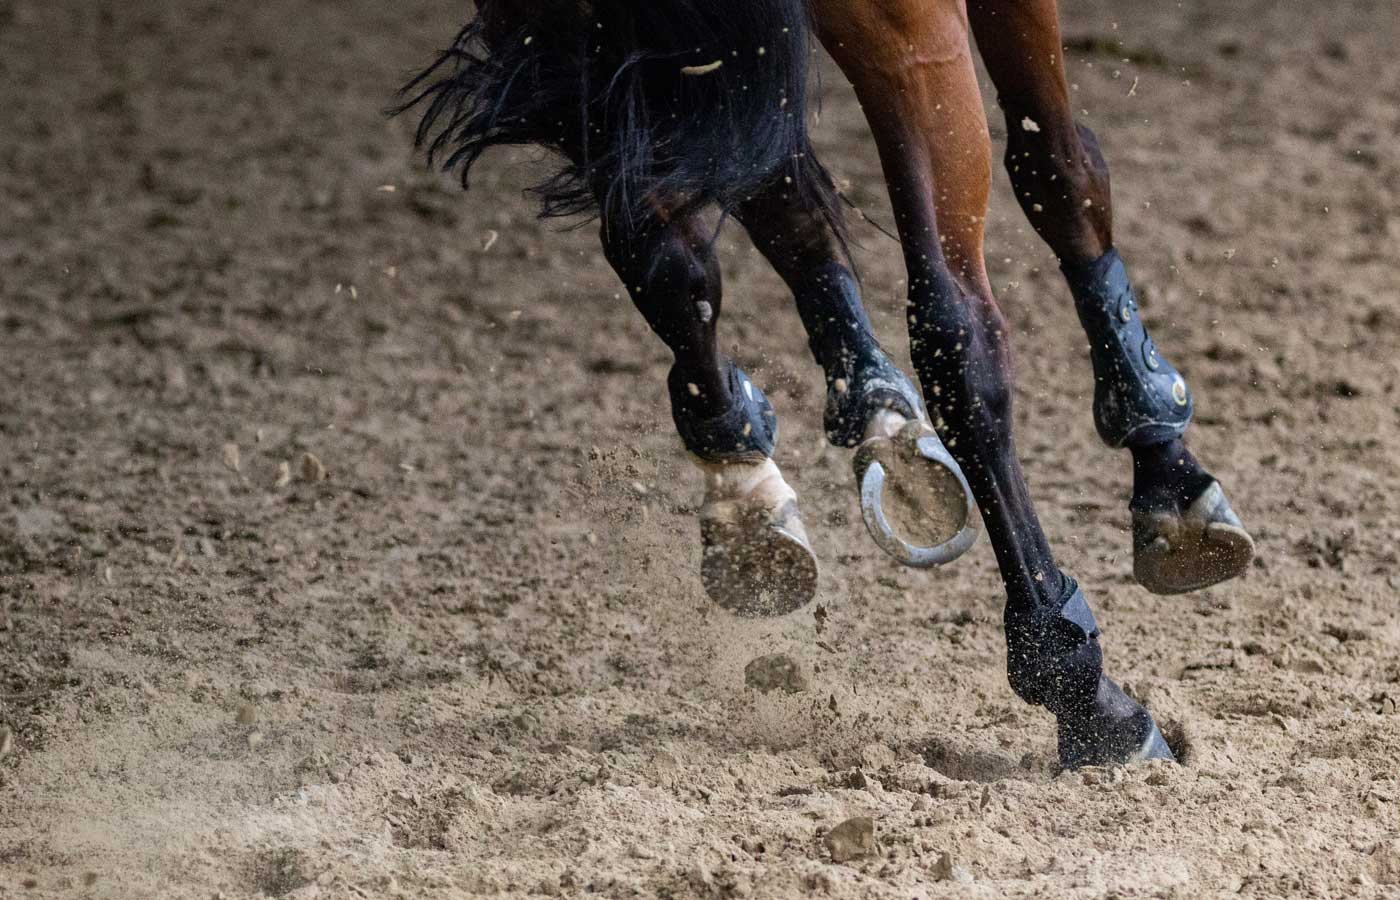 Shows a horses legs galloping around a track